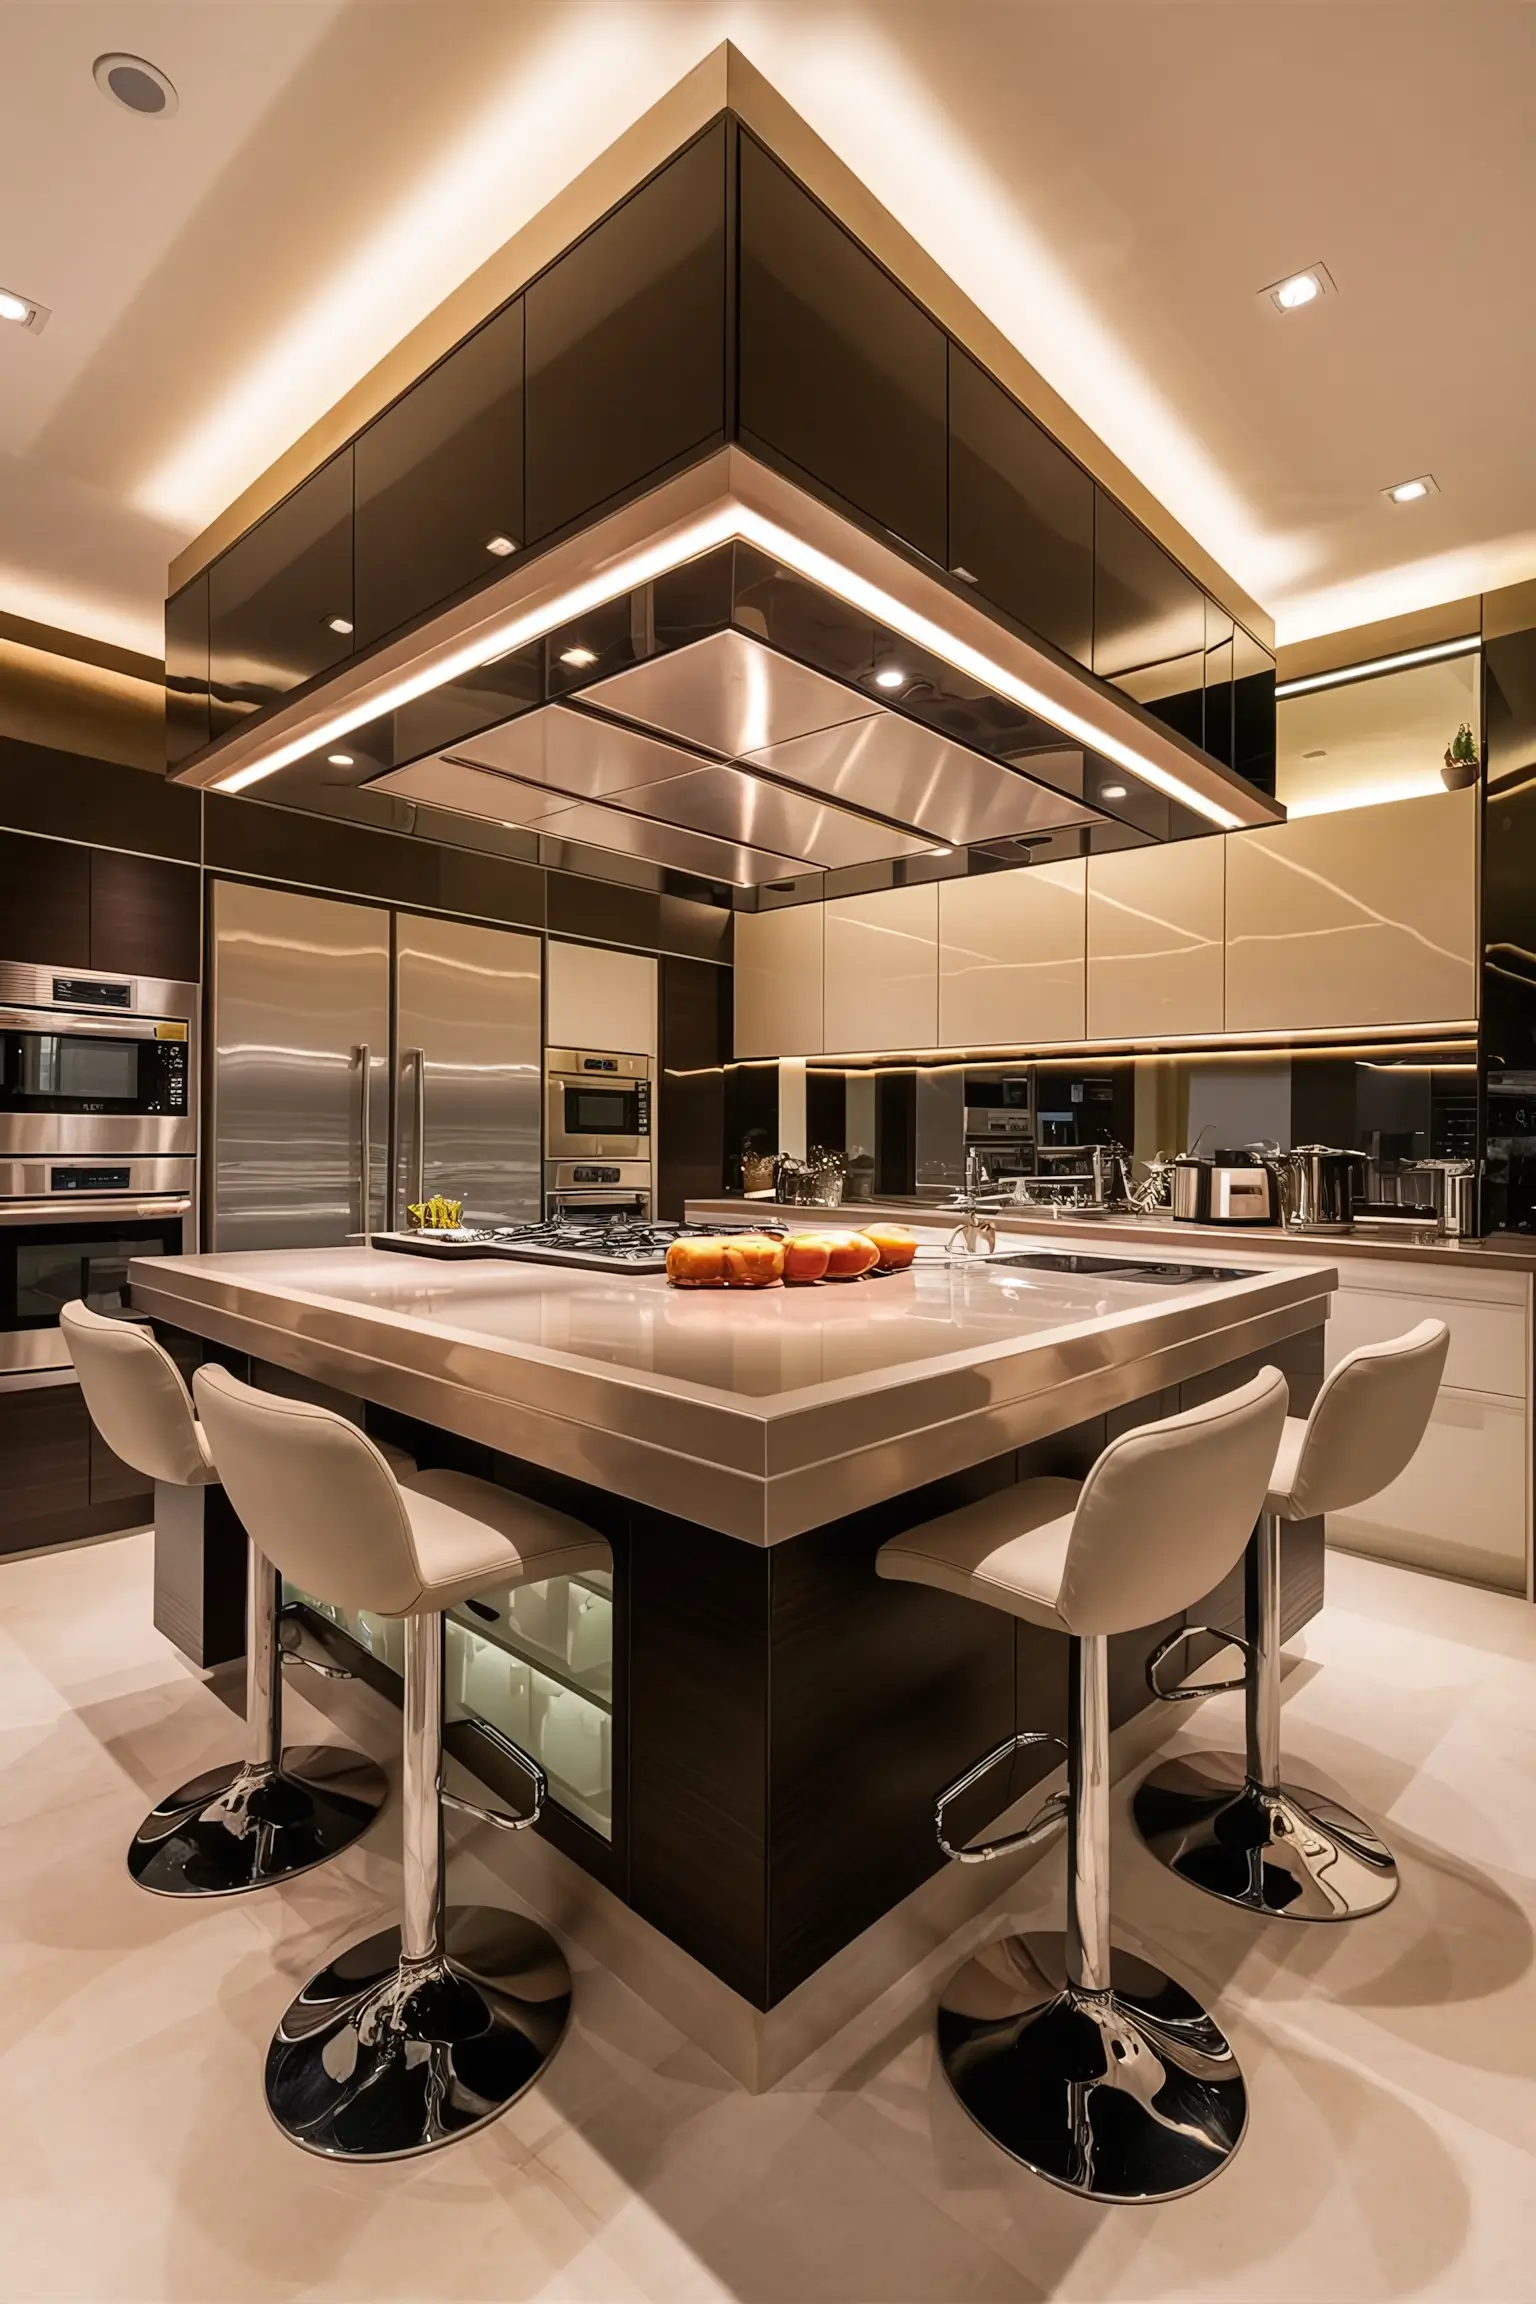 Modern kitchen with a large island featuring sleek countertops, built-in storage, and stylish bar stools.